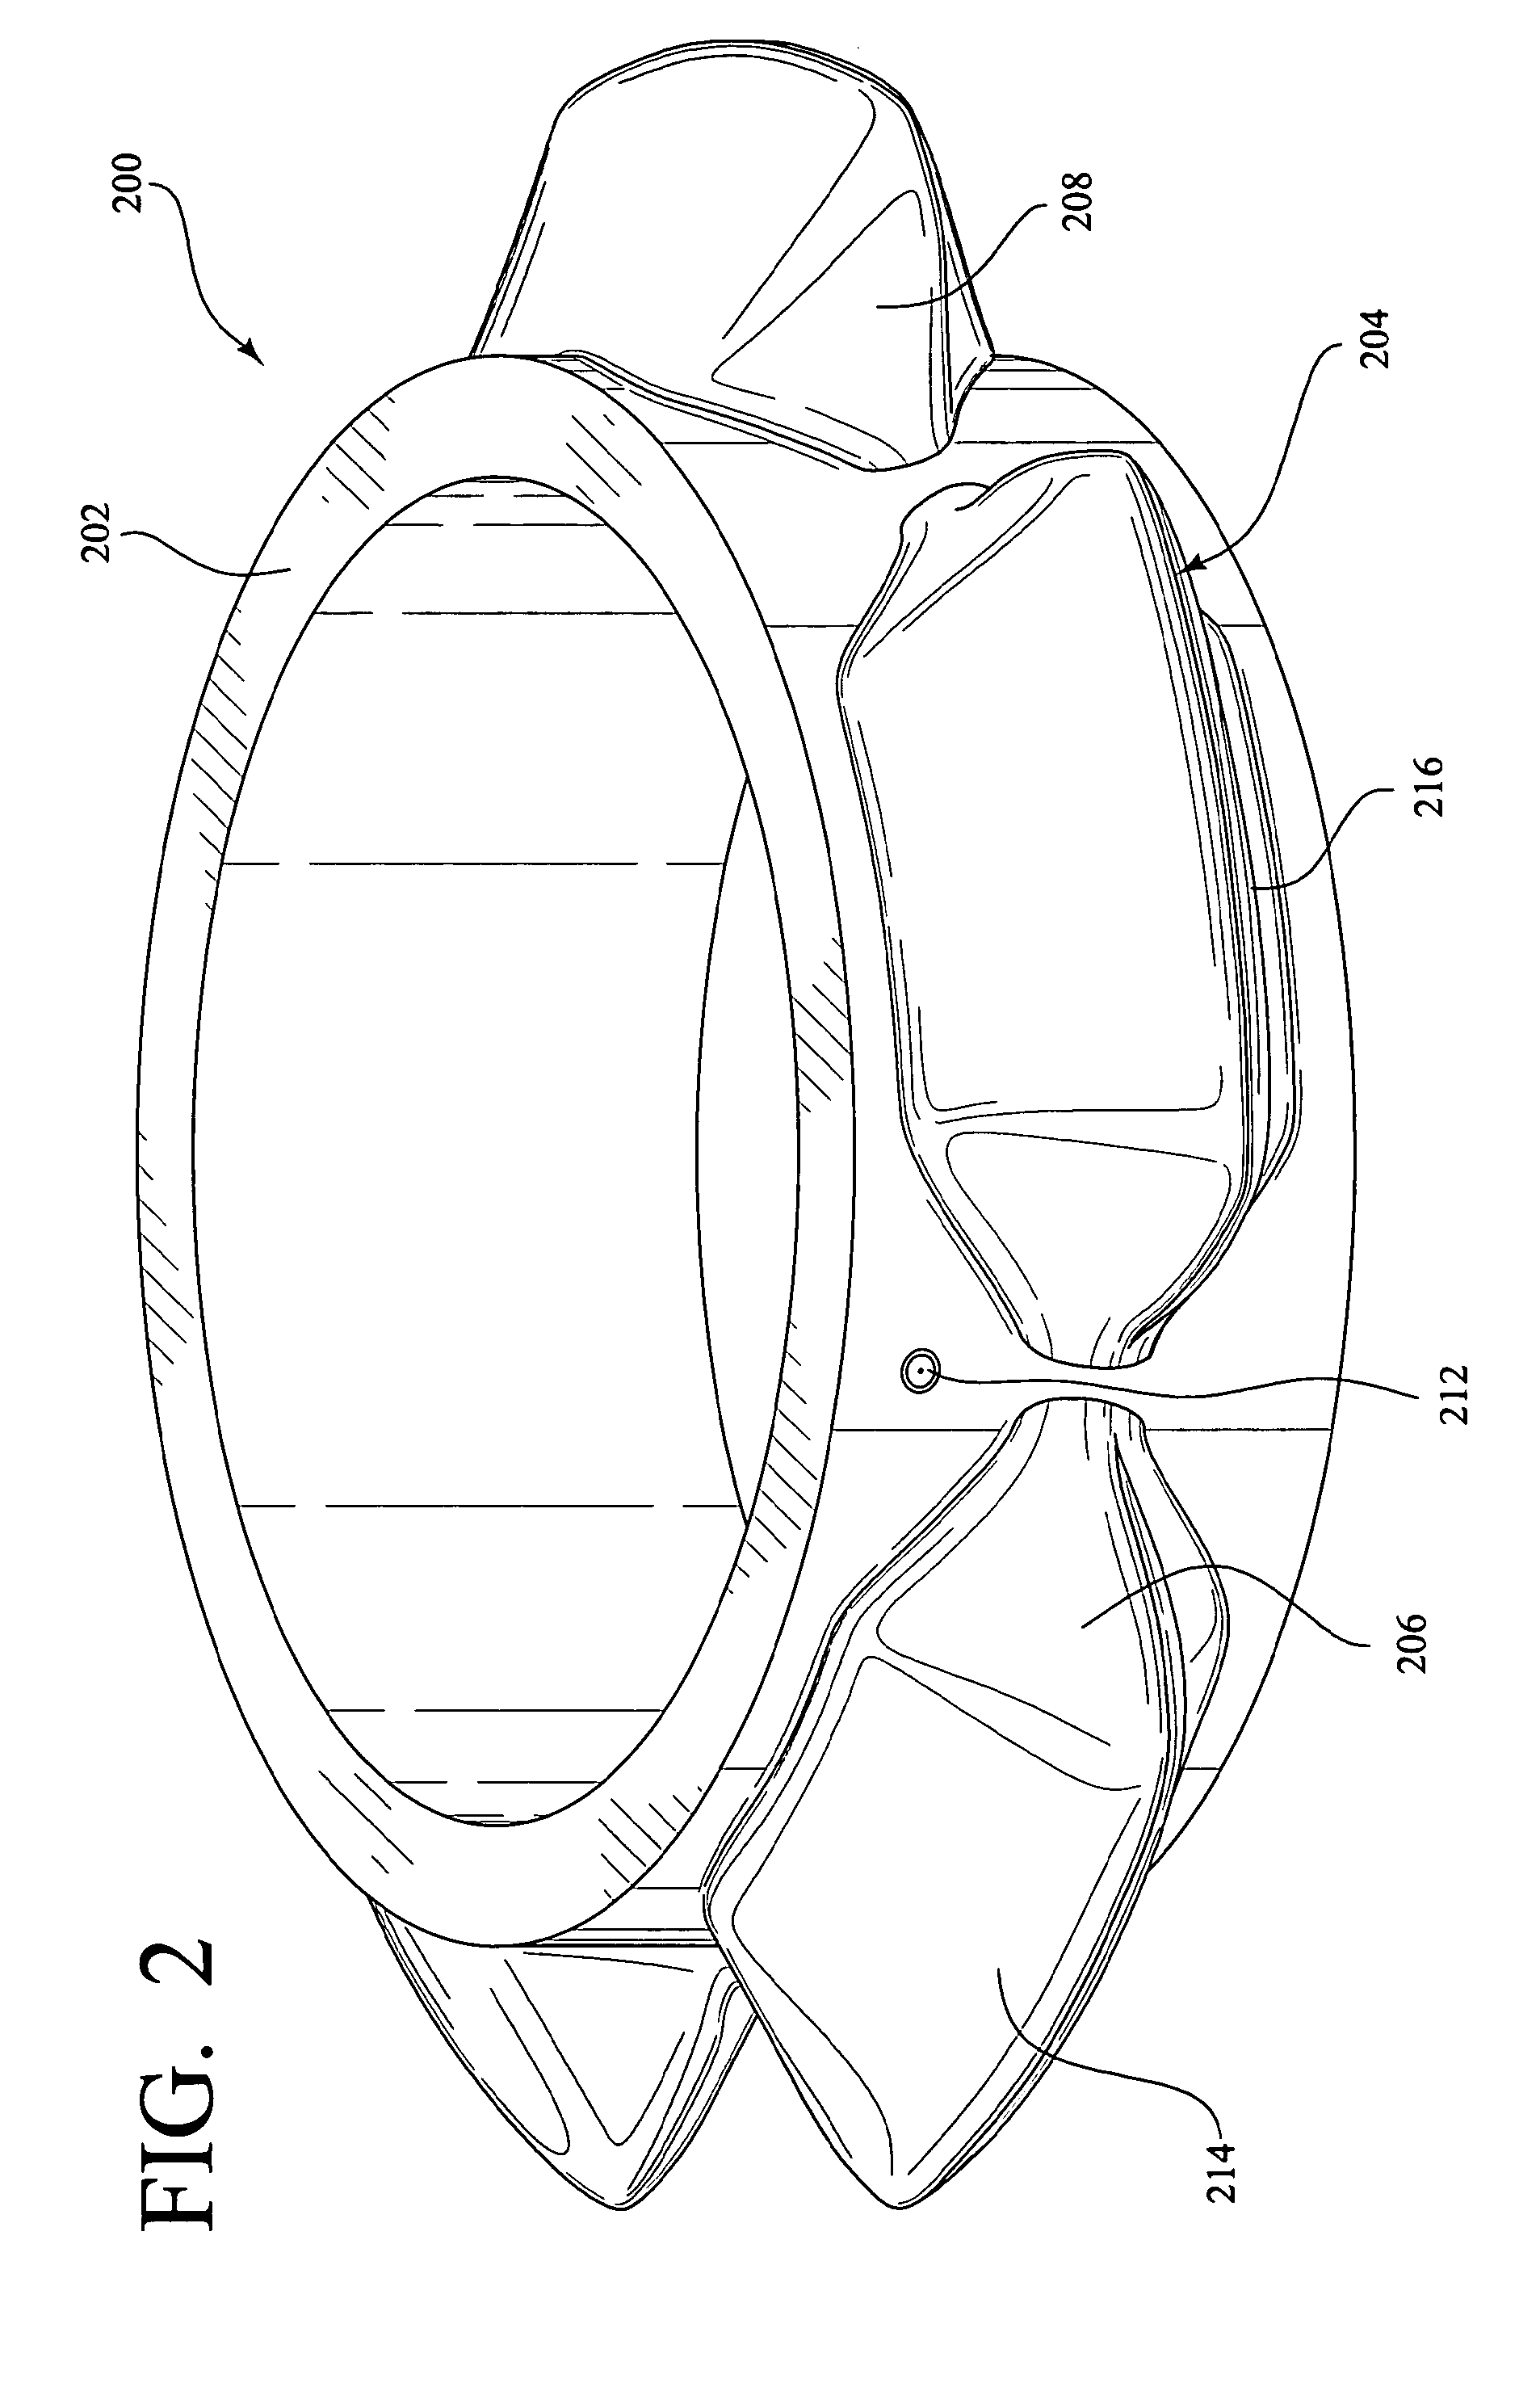 Soil conditioning device